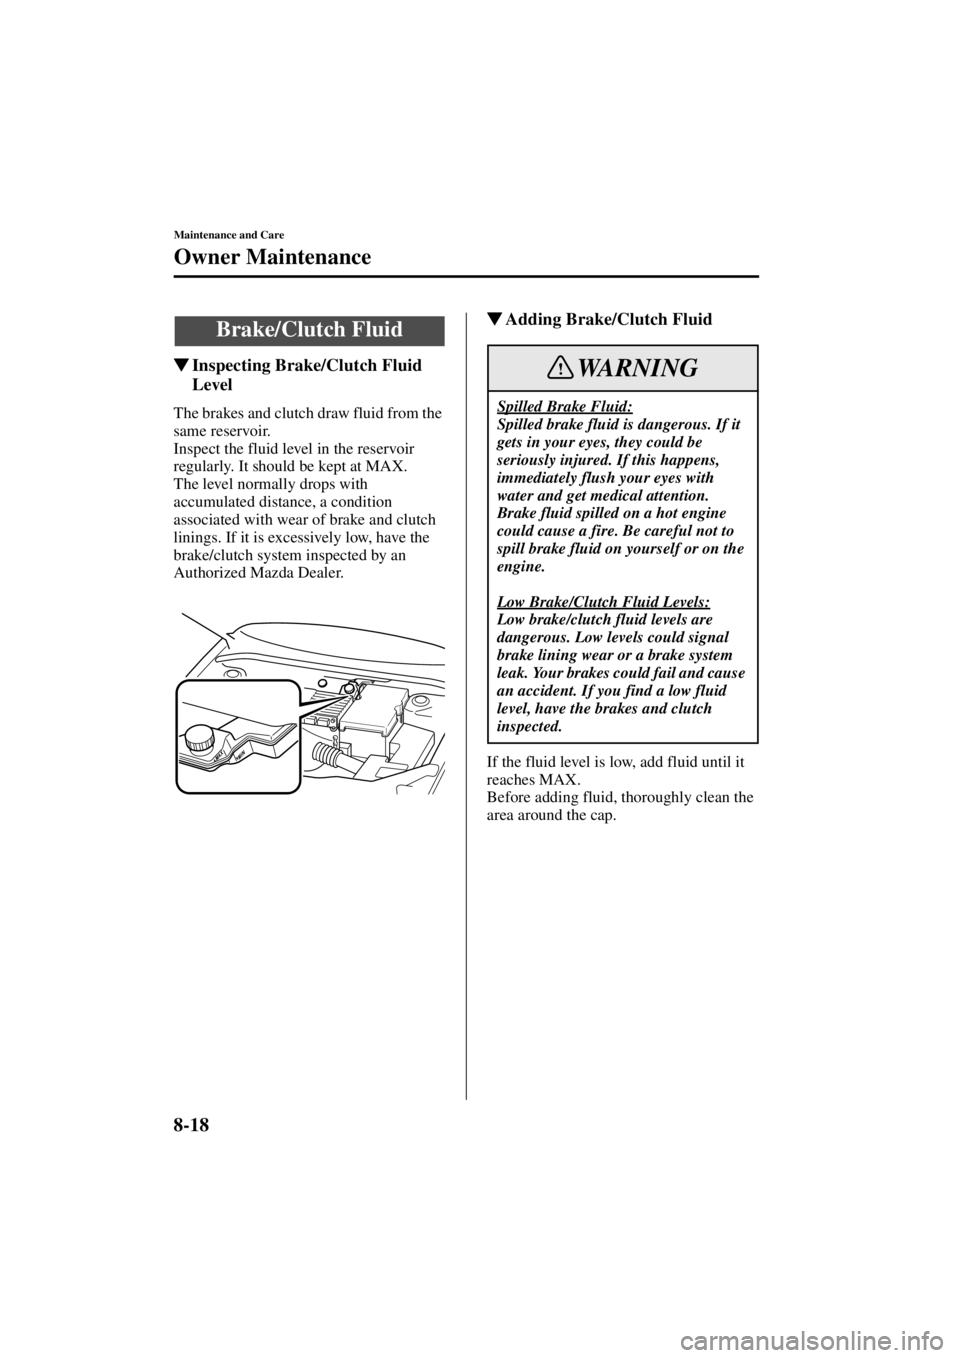 MAZDA MODEL 3 5-DOOR 2004  Owners Manual 8-18
Maintenance and Care
Owner Maintenance
Form No. 8S18-EA-03I
Inspecting Brake/Clutch Fluid 
Level
The brakes and clutch draw fluid from the 
same reservoir.
Inspect the fluid level in the reservo